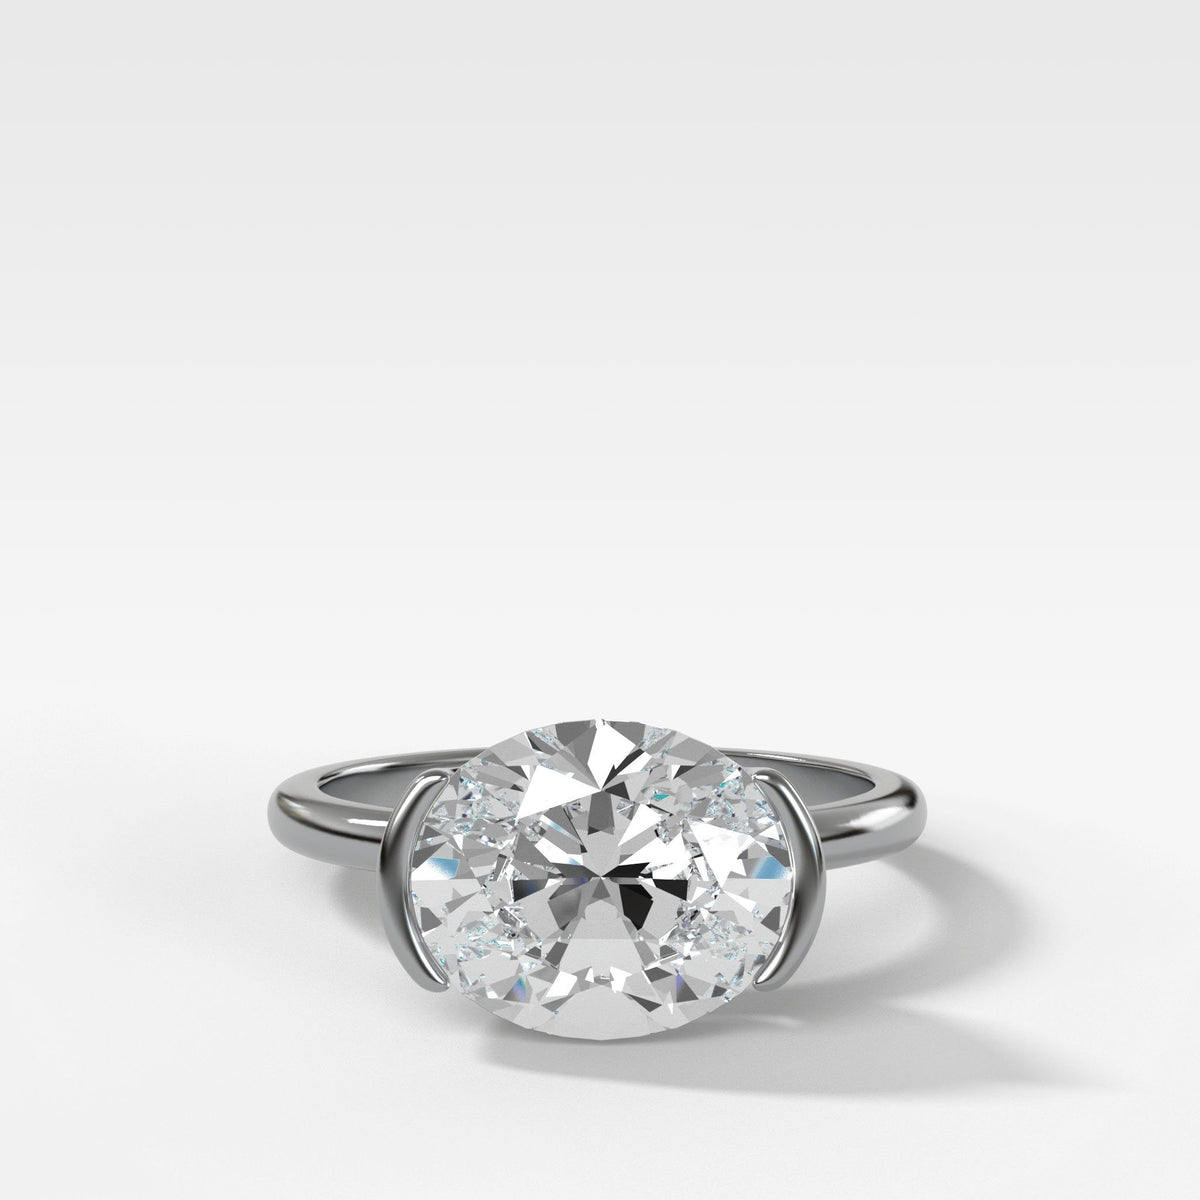 East West Half Bezel Solitaire Engagement Ring With Oval Cut in White Gold by Good Stone